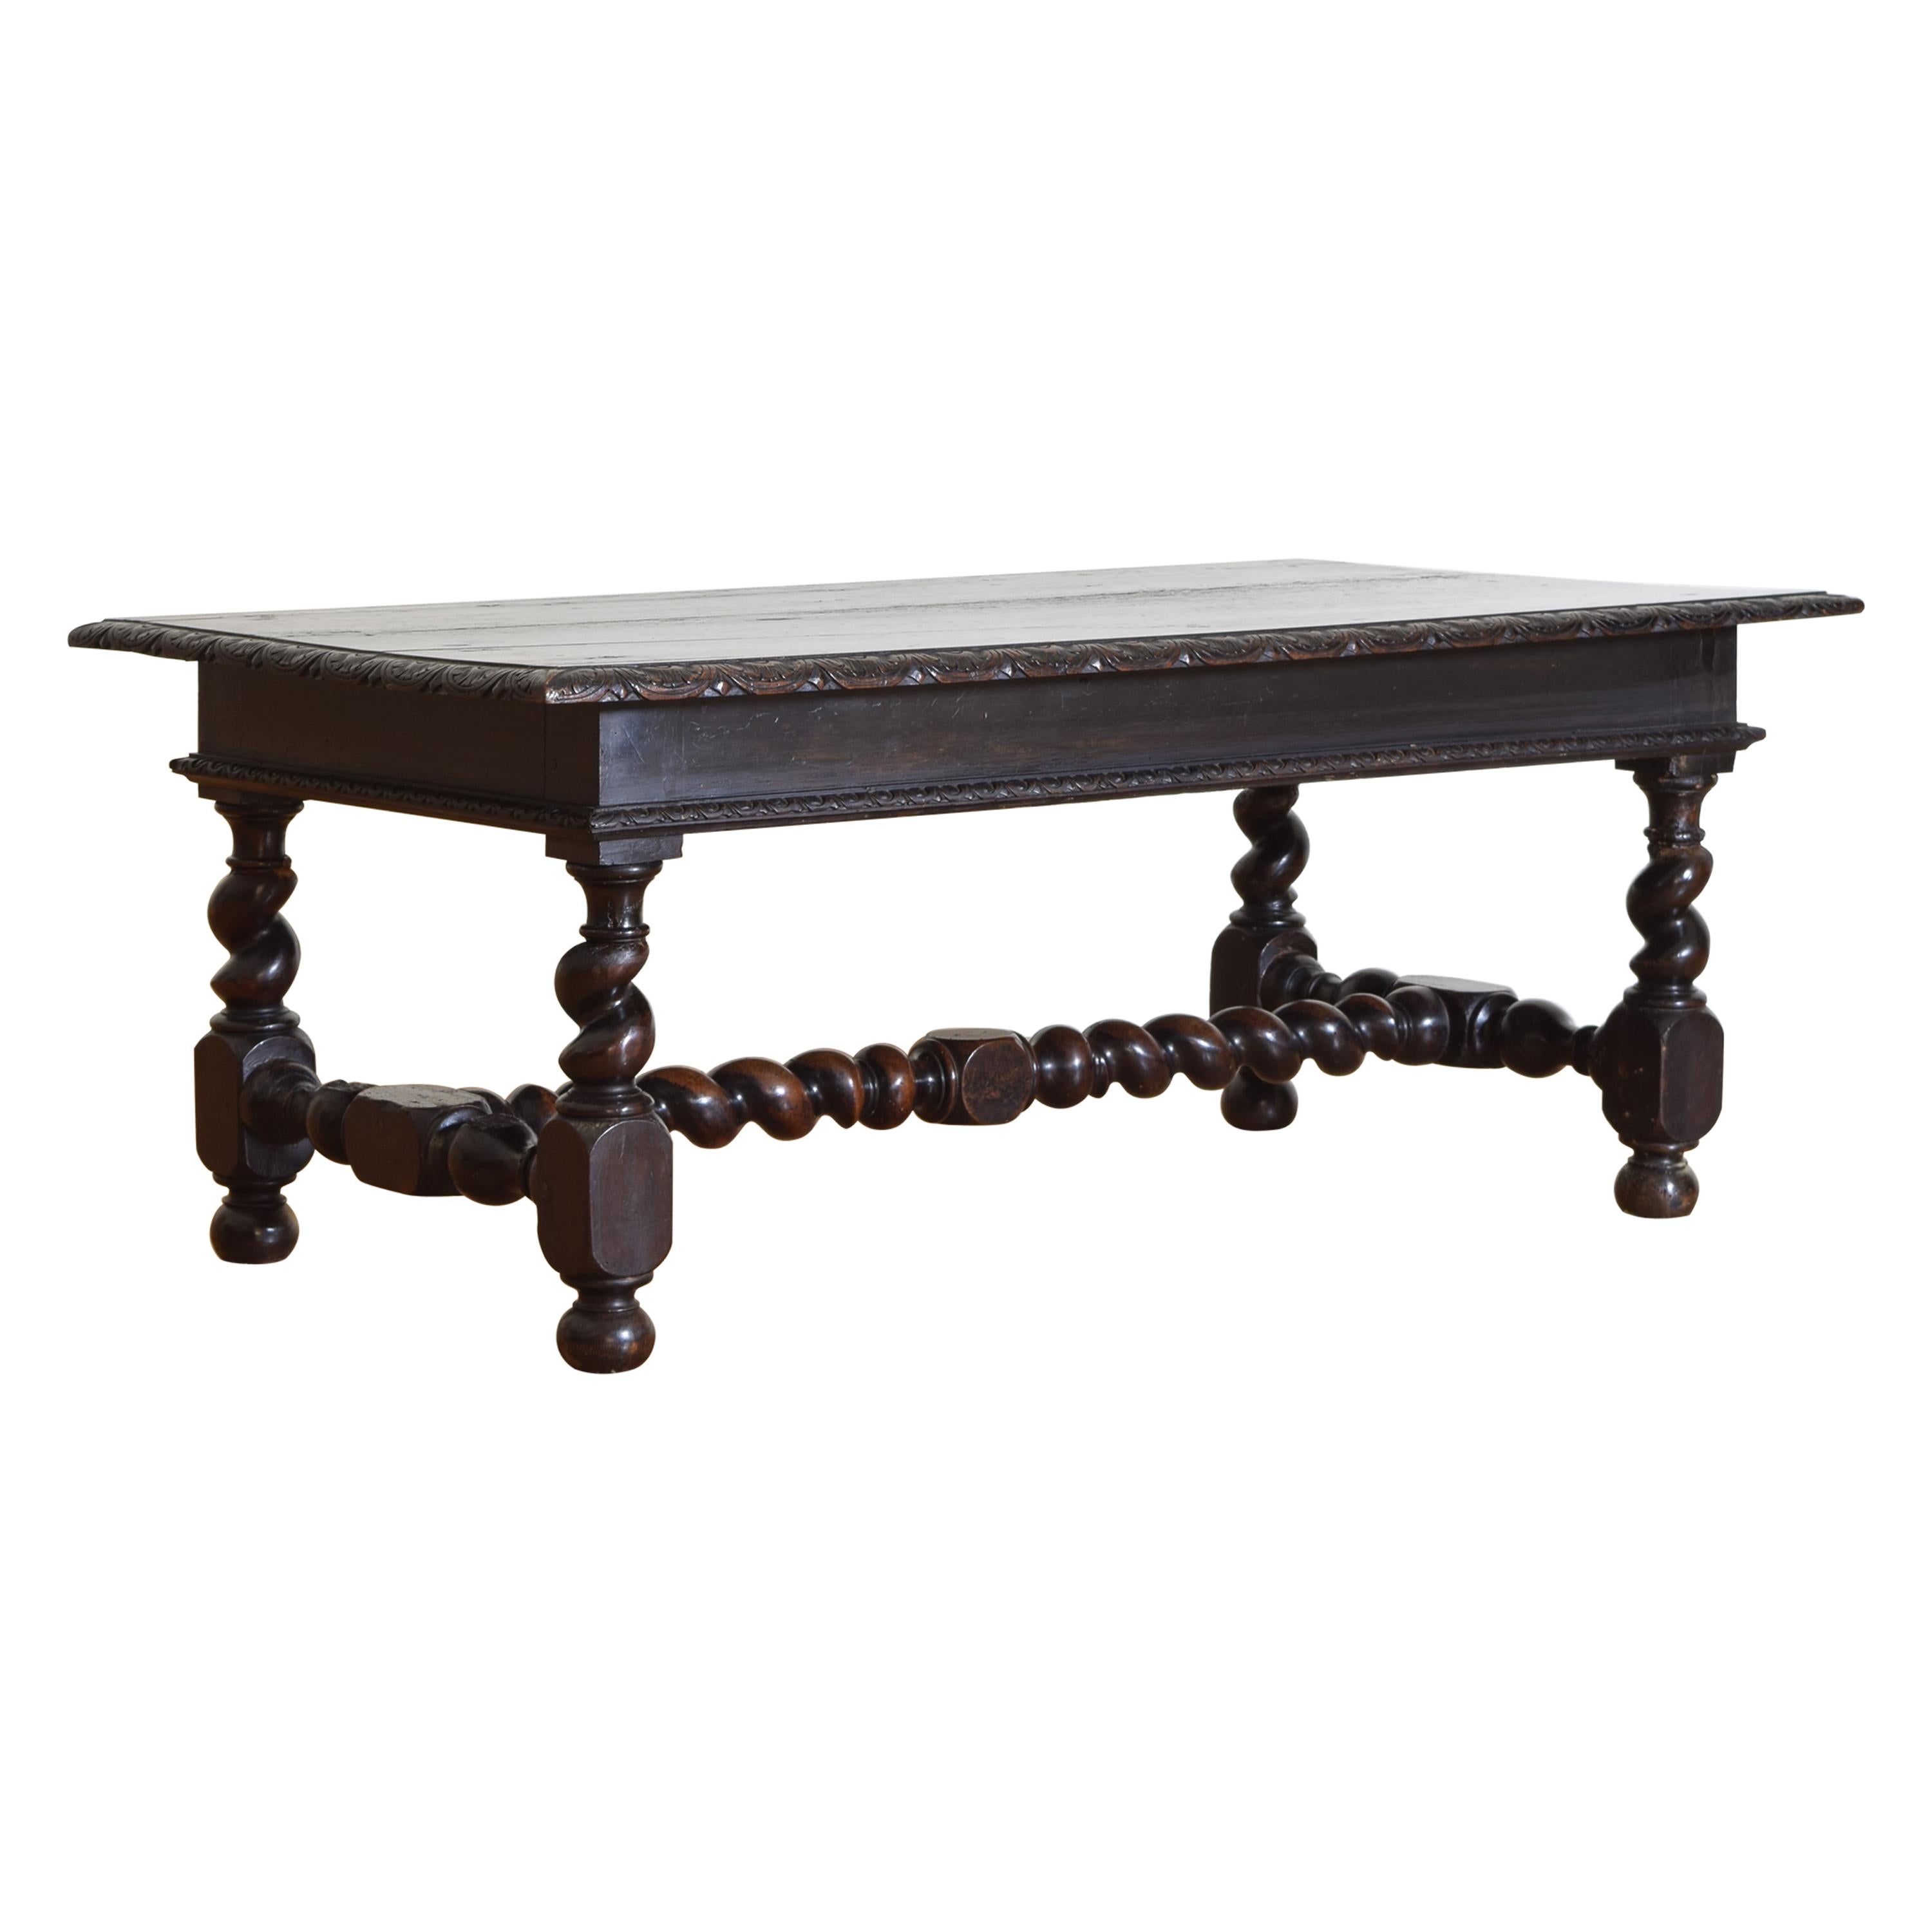 Italian Baroque Style Carved and Ebonized Walnut Coffee Table, Mid 19th Century